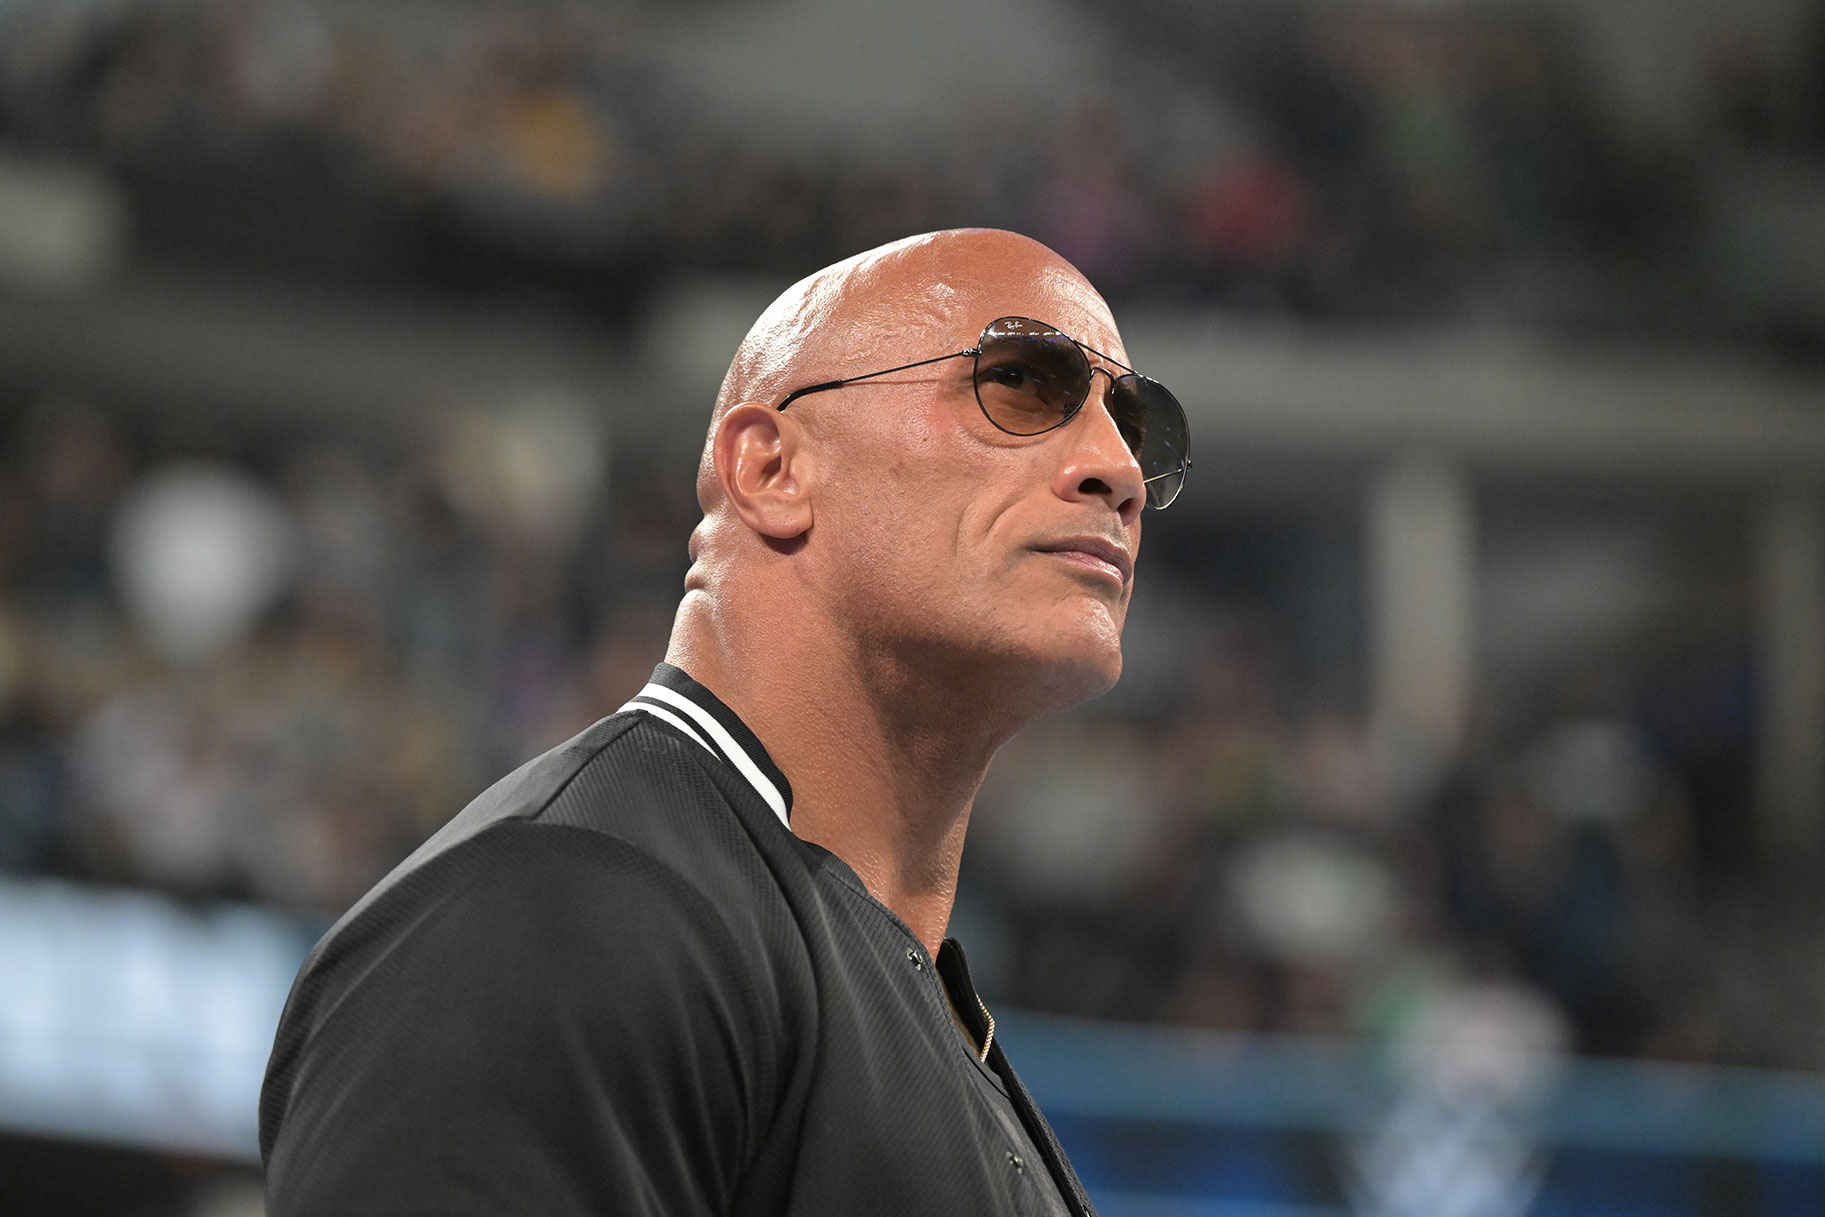 The Rock's WWE Comeback: A Stir in the Wrestling World